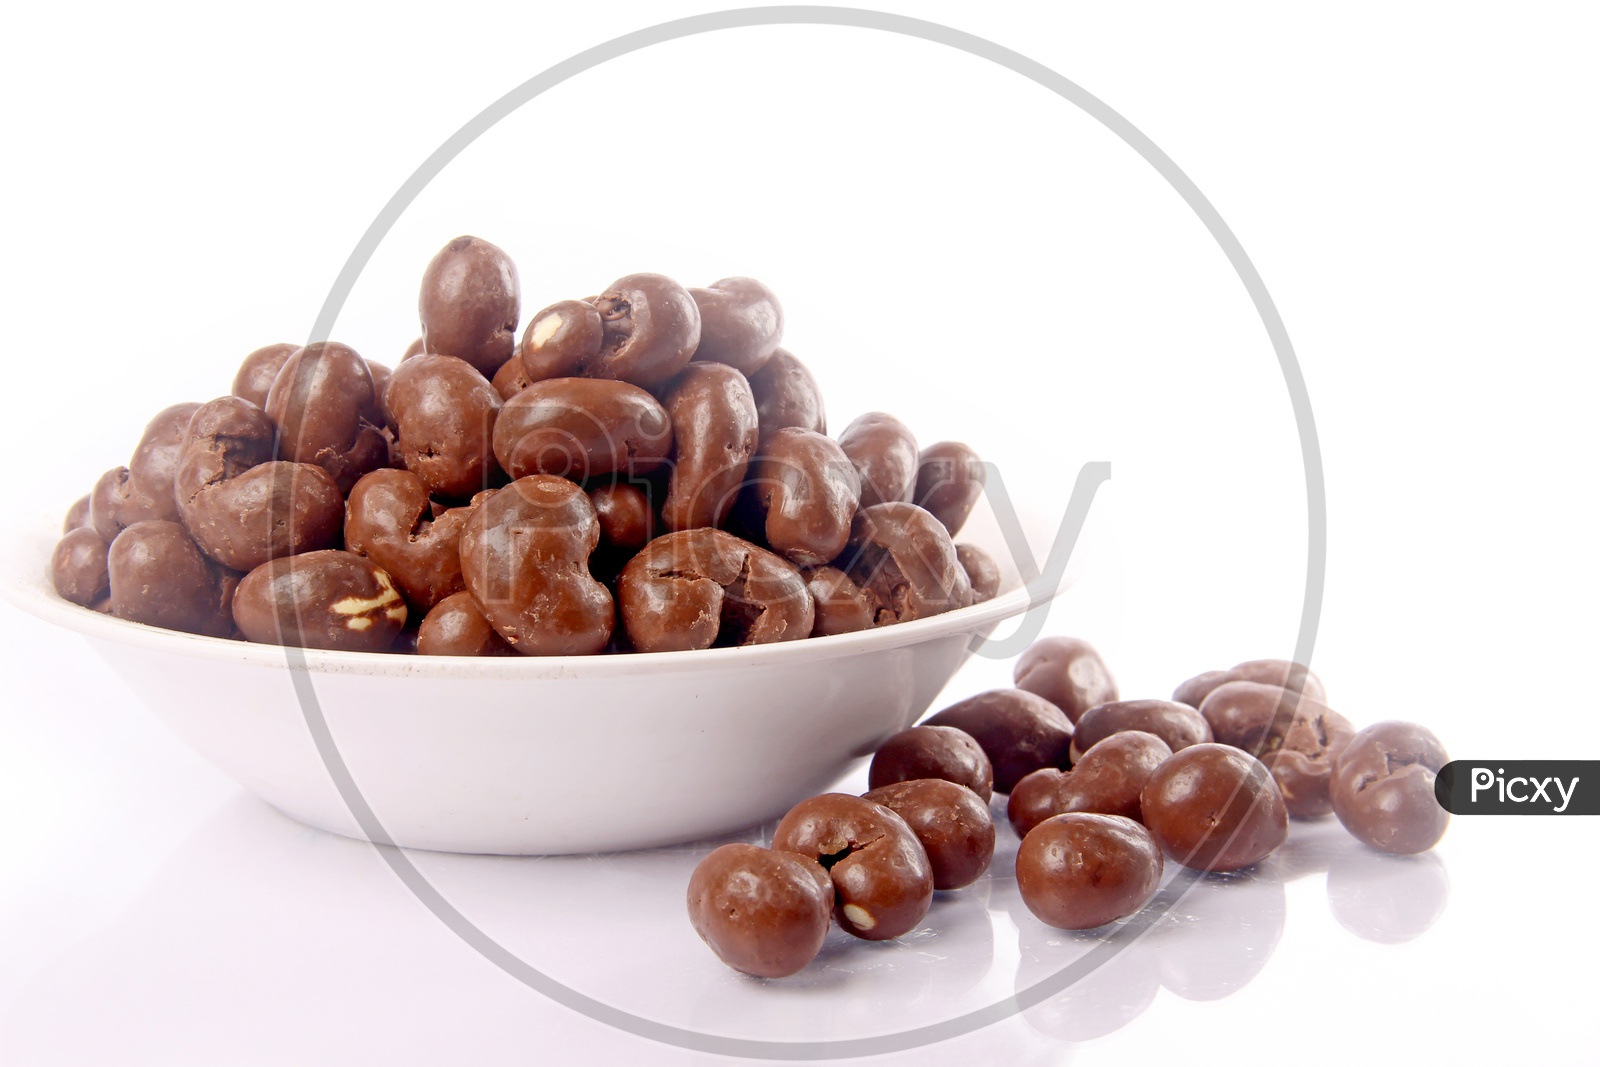 Chocolate Coated Cashew Nuts in a Bowl